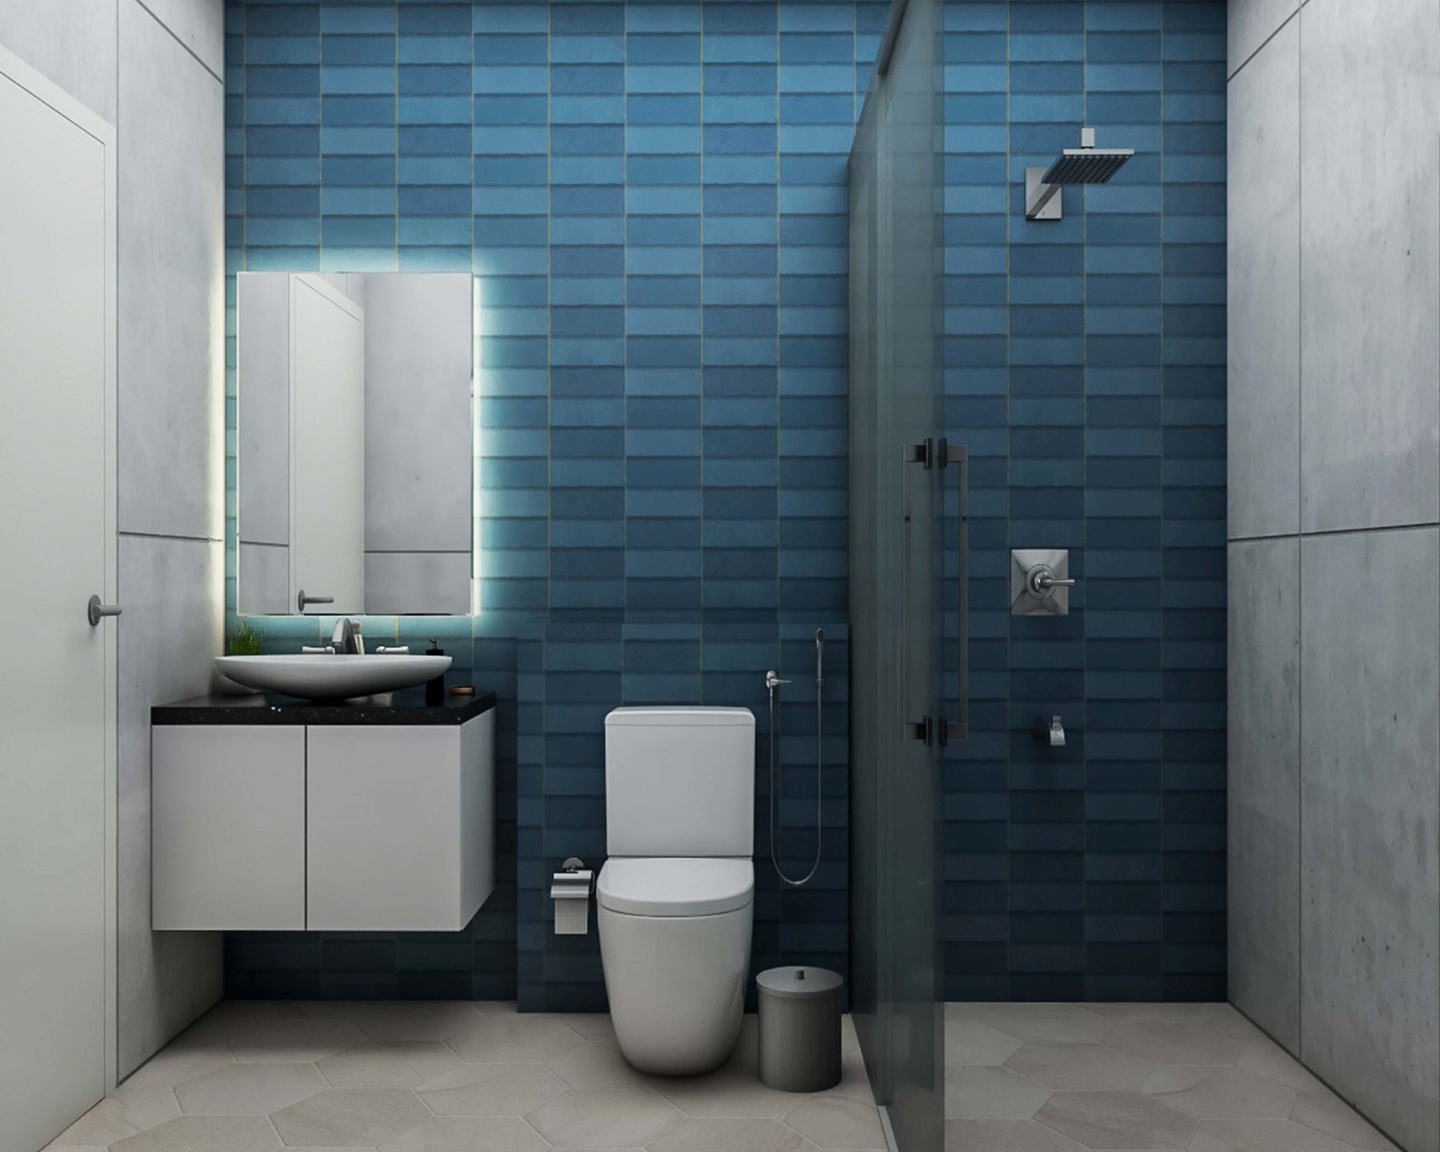 Small Bathroom Design With Blue Accent Tiles - Livspace